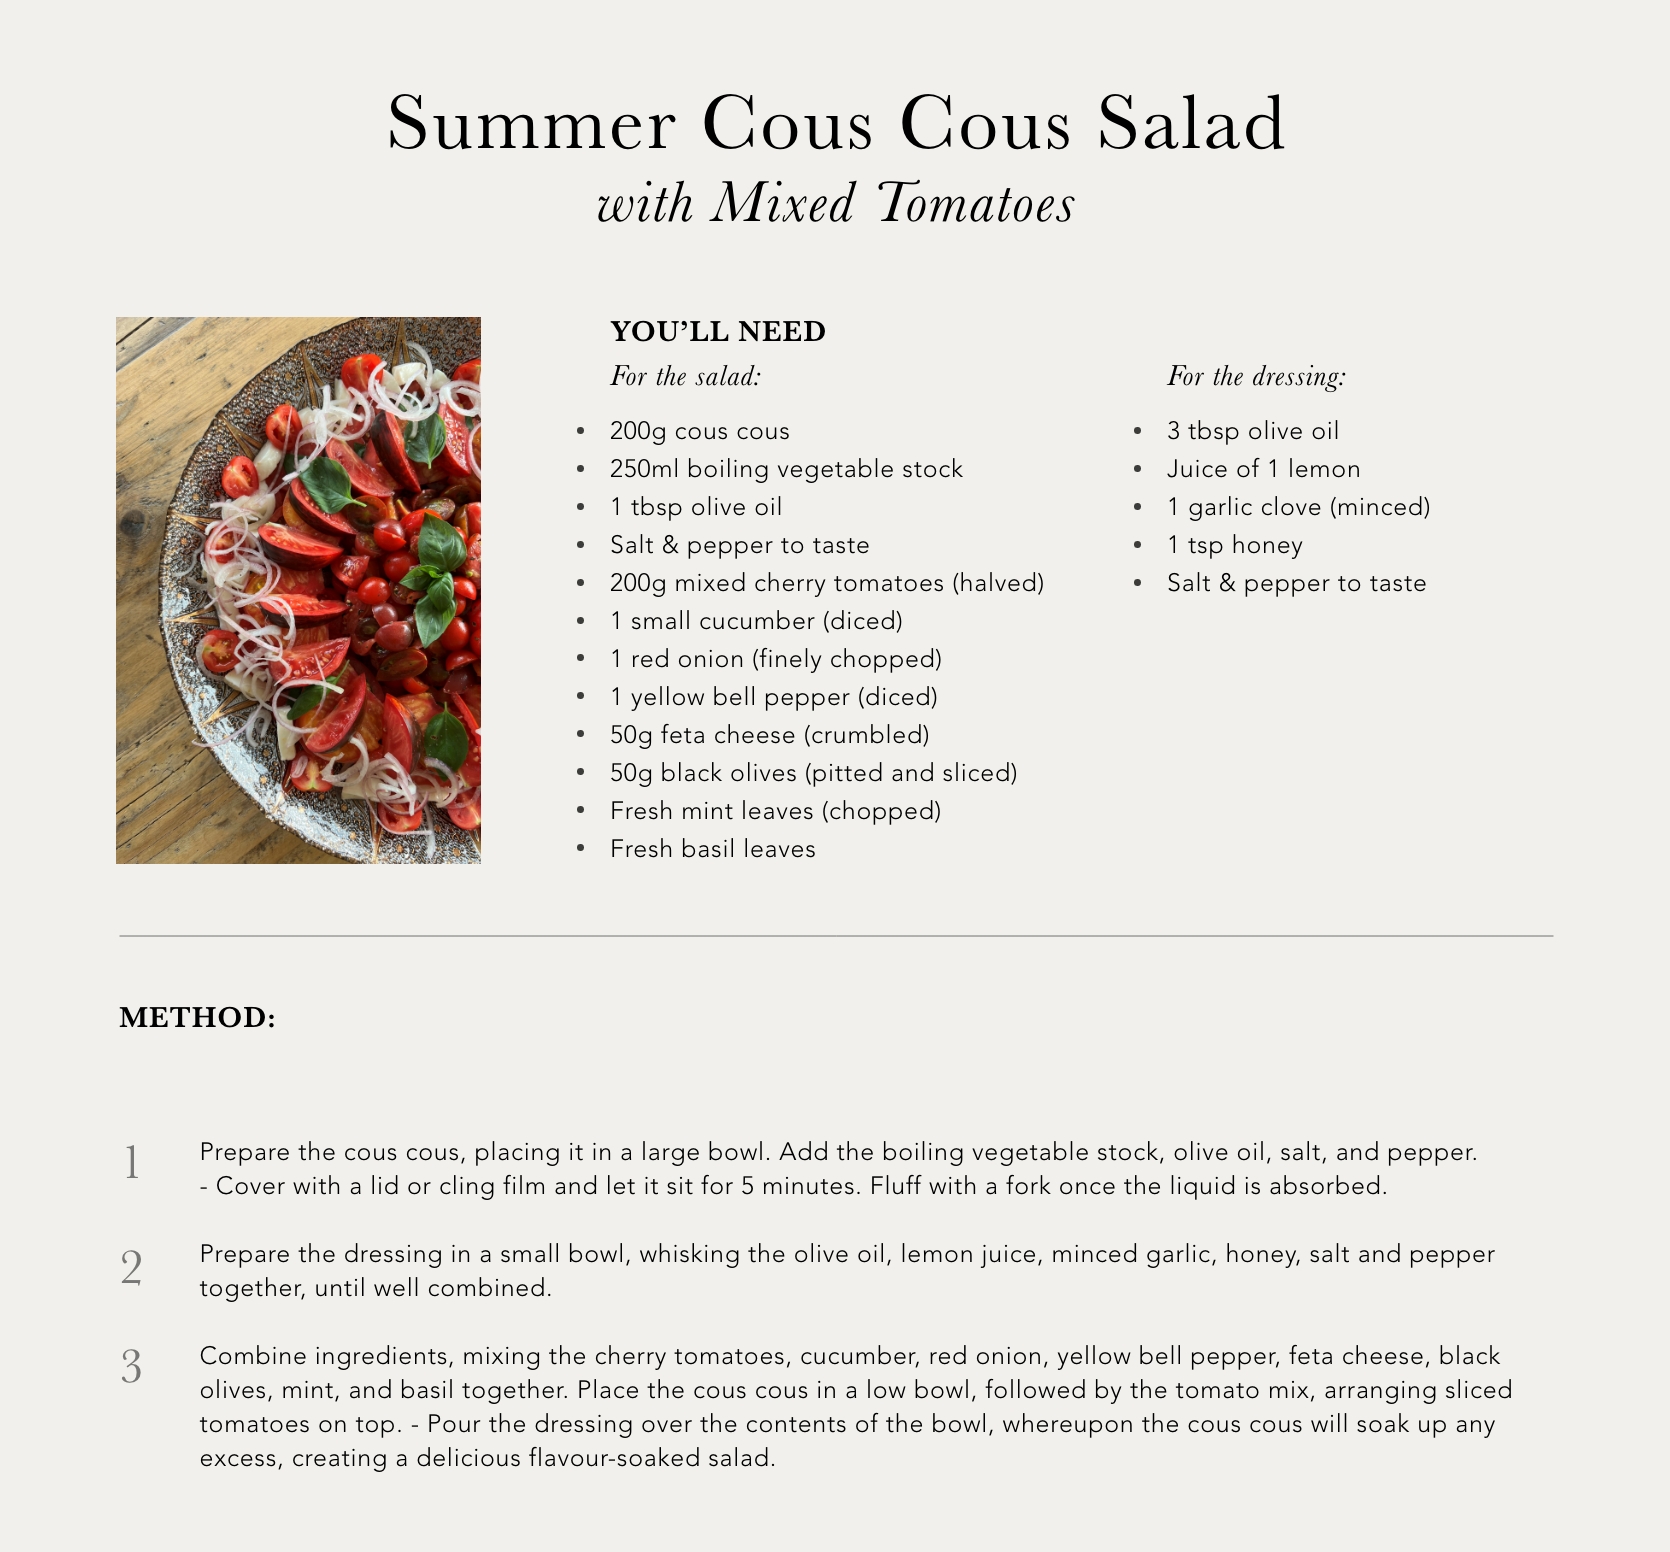 Summer Cous Cous Salad with Mixed Tomatoes Recipe Card